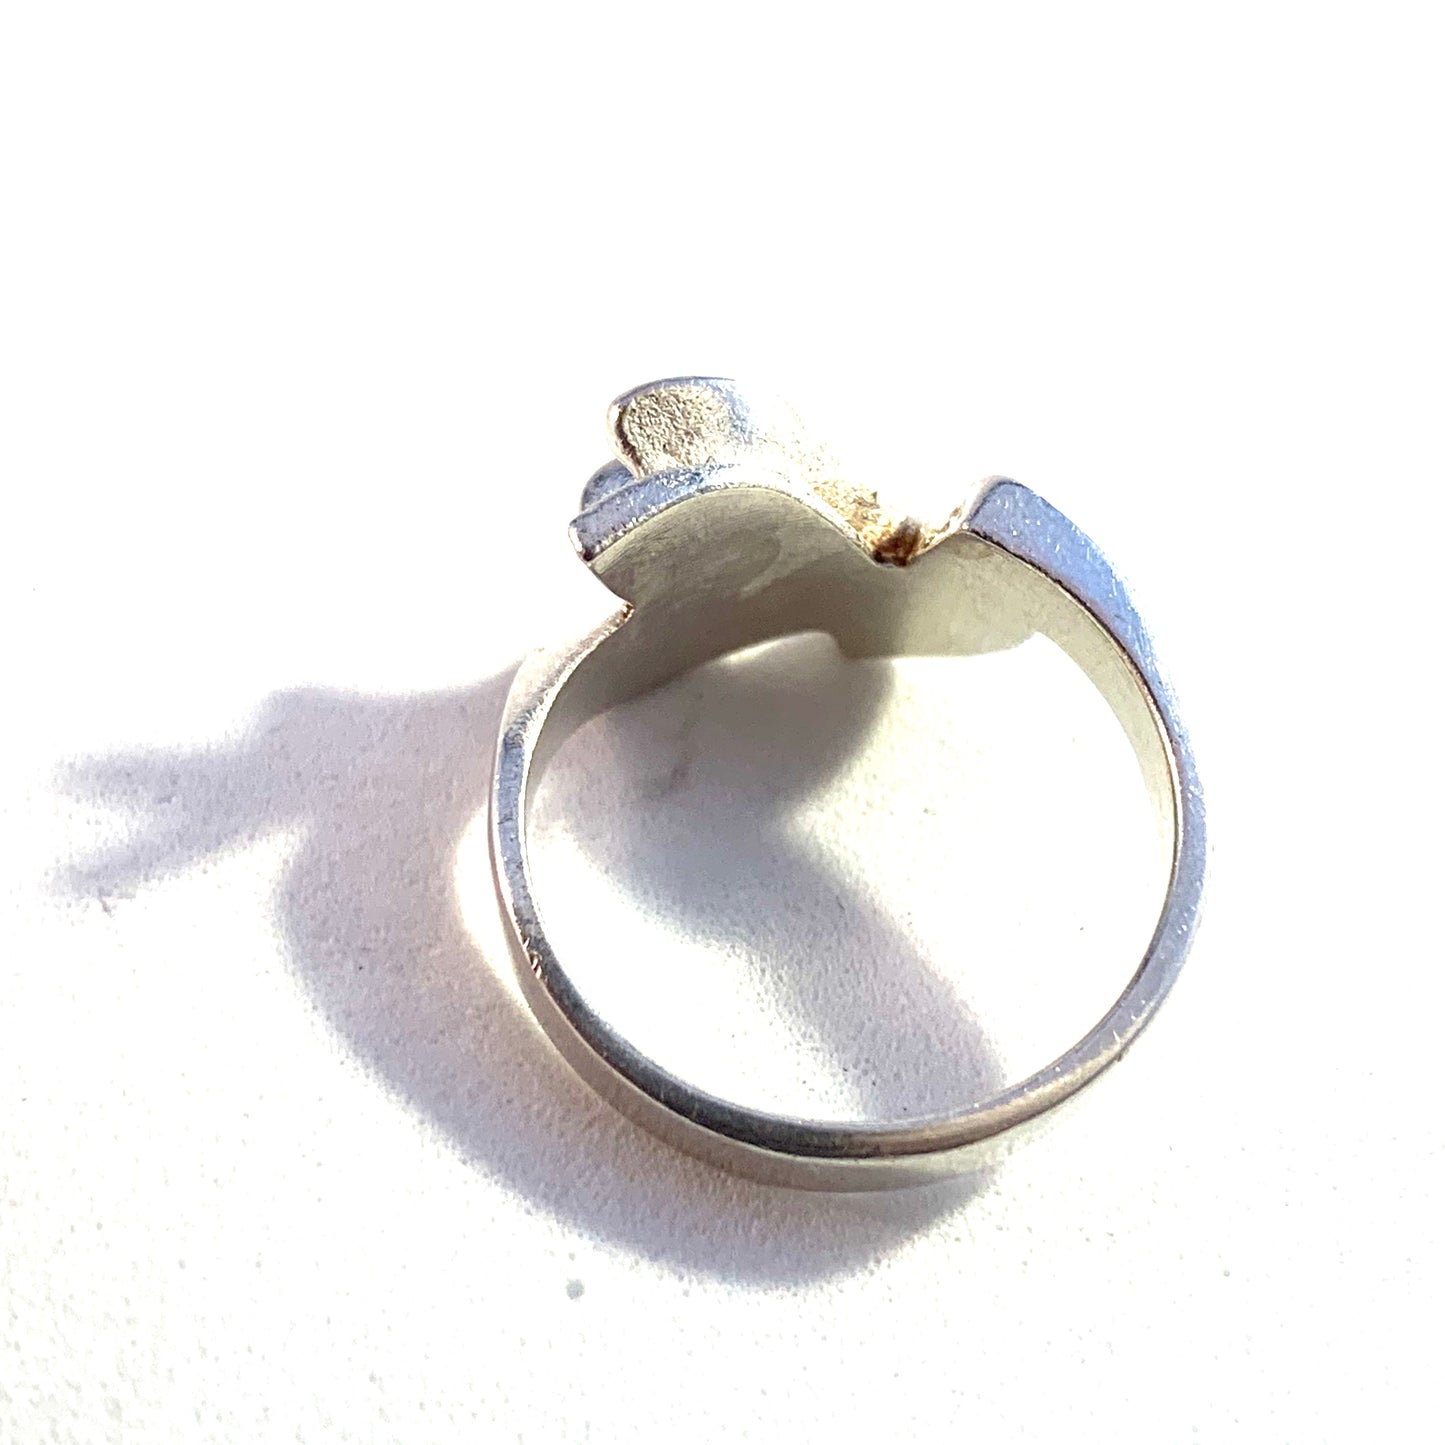 Lapponia, Finland Vintage 1987 Sterling Silver Ring.